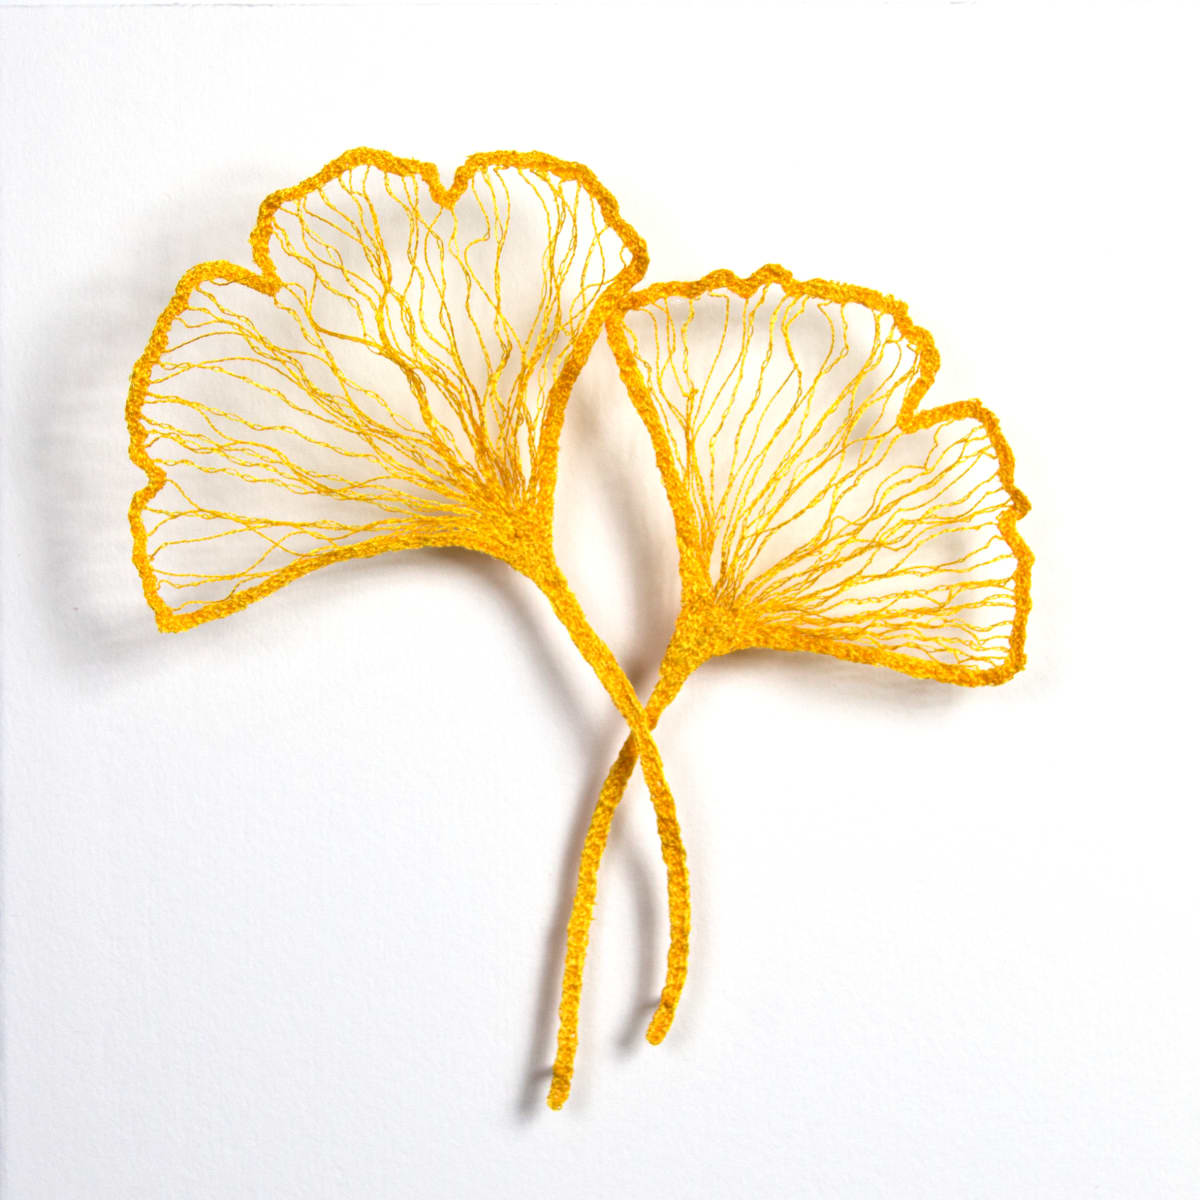 Little Ginkgo study 1 by Meredith Woolnough 